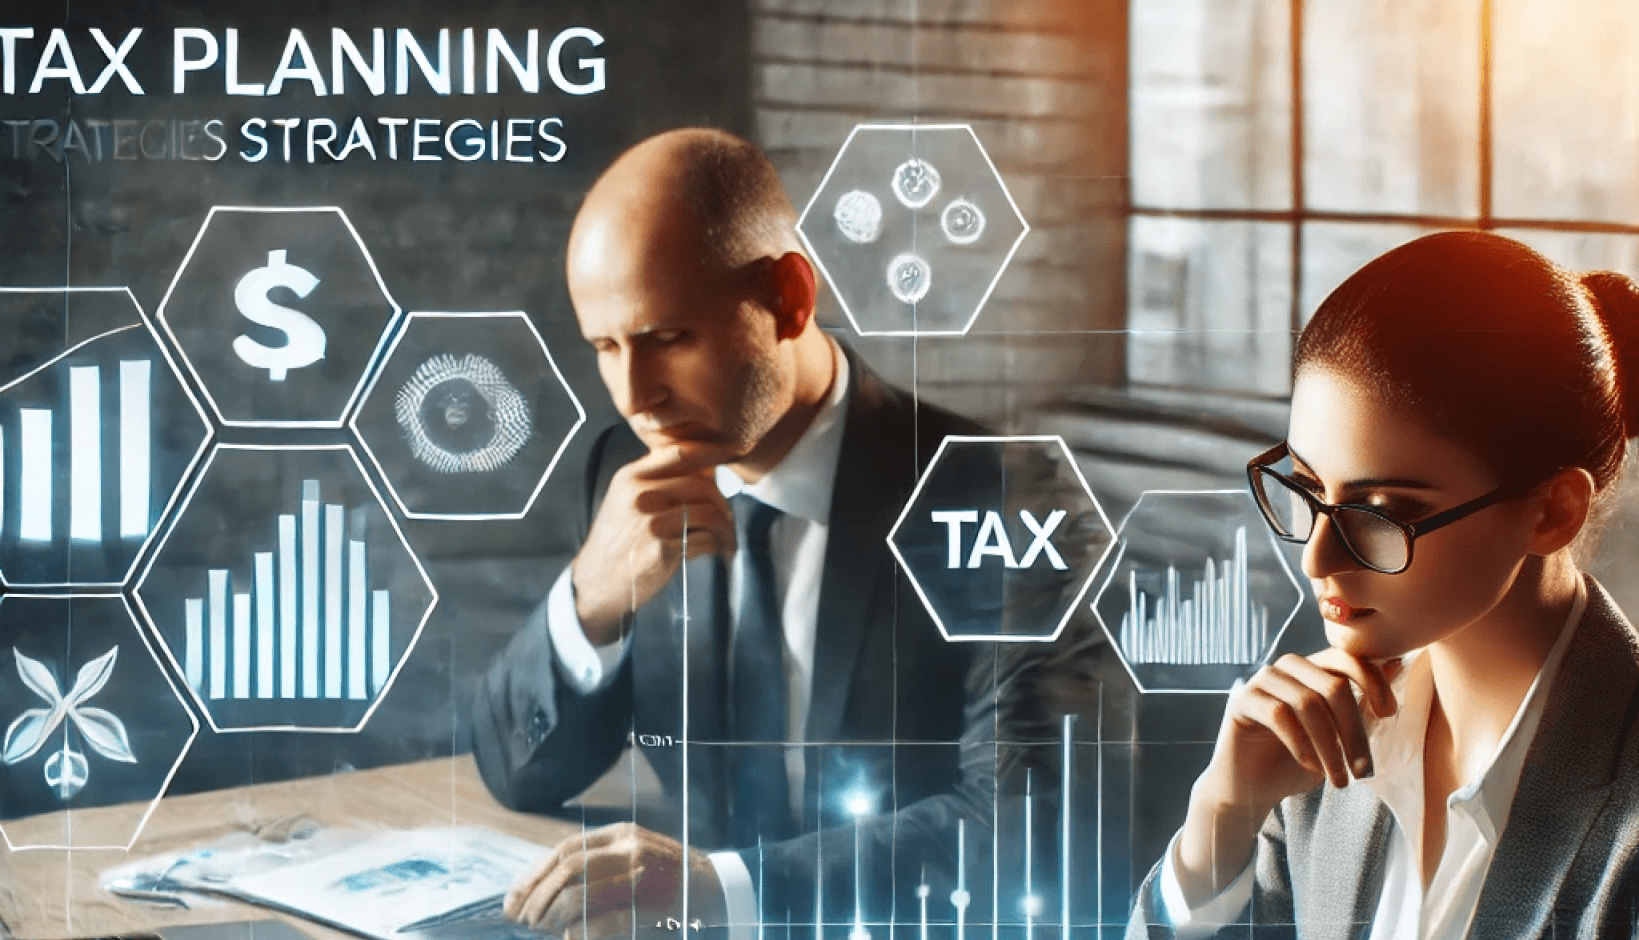 Tax planning strategies for businesses - Samson Solutions